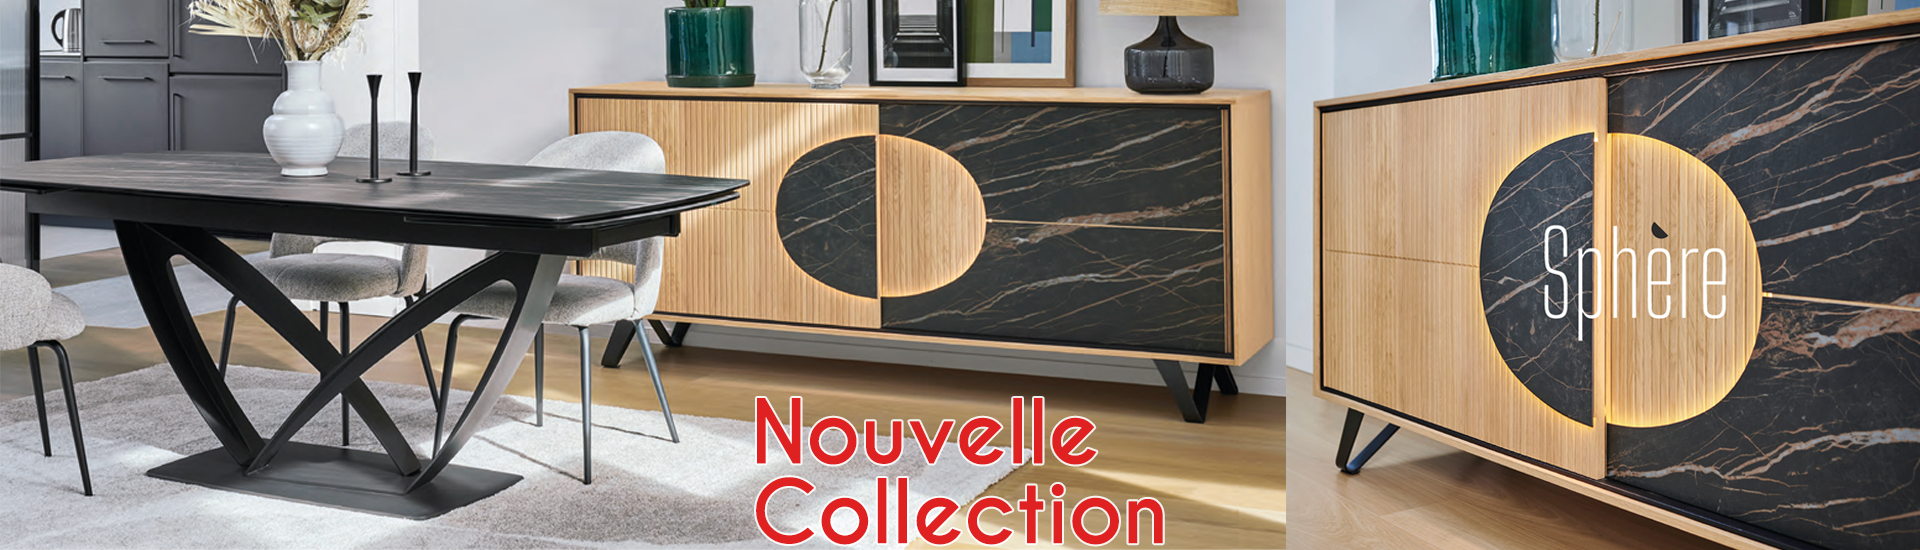 Nouvelle collection sphere